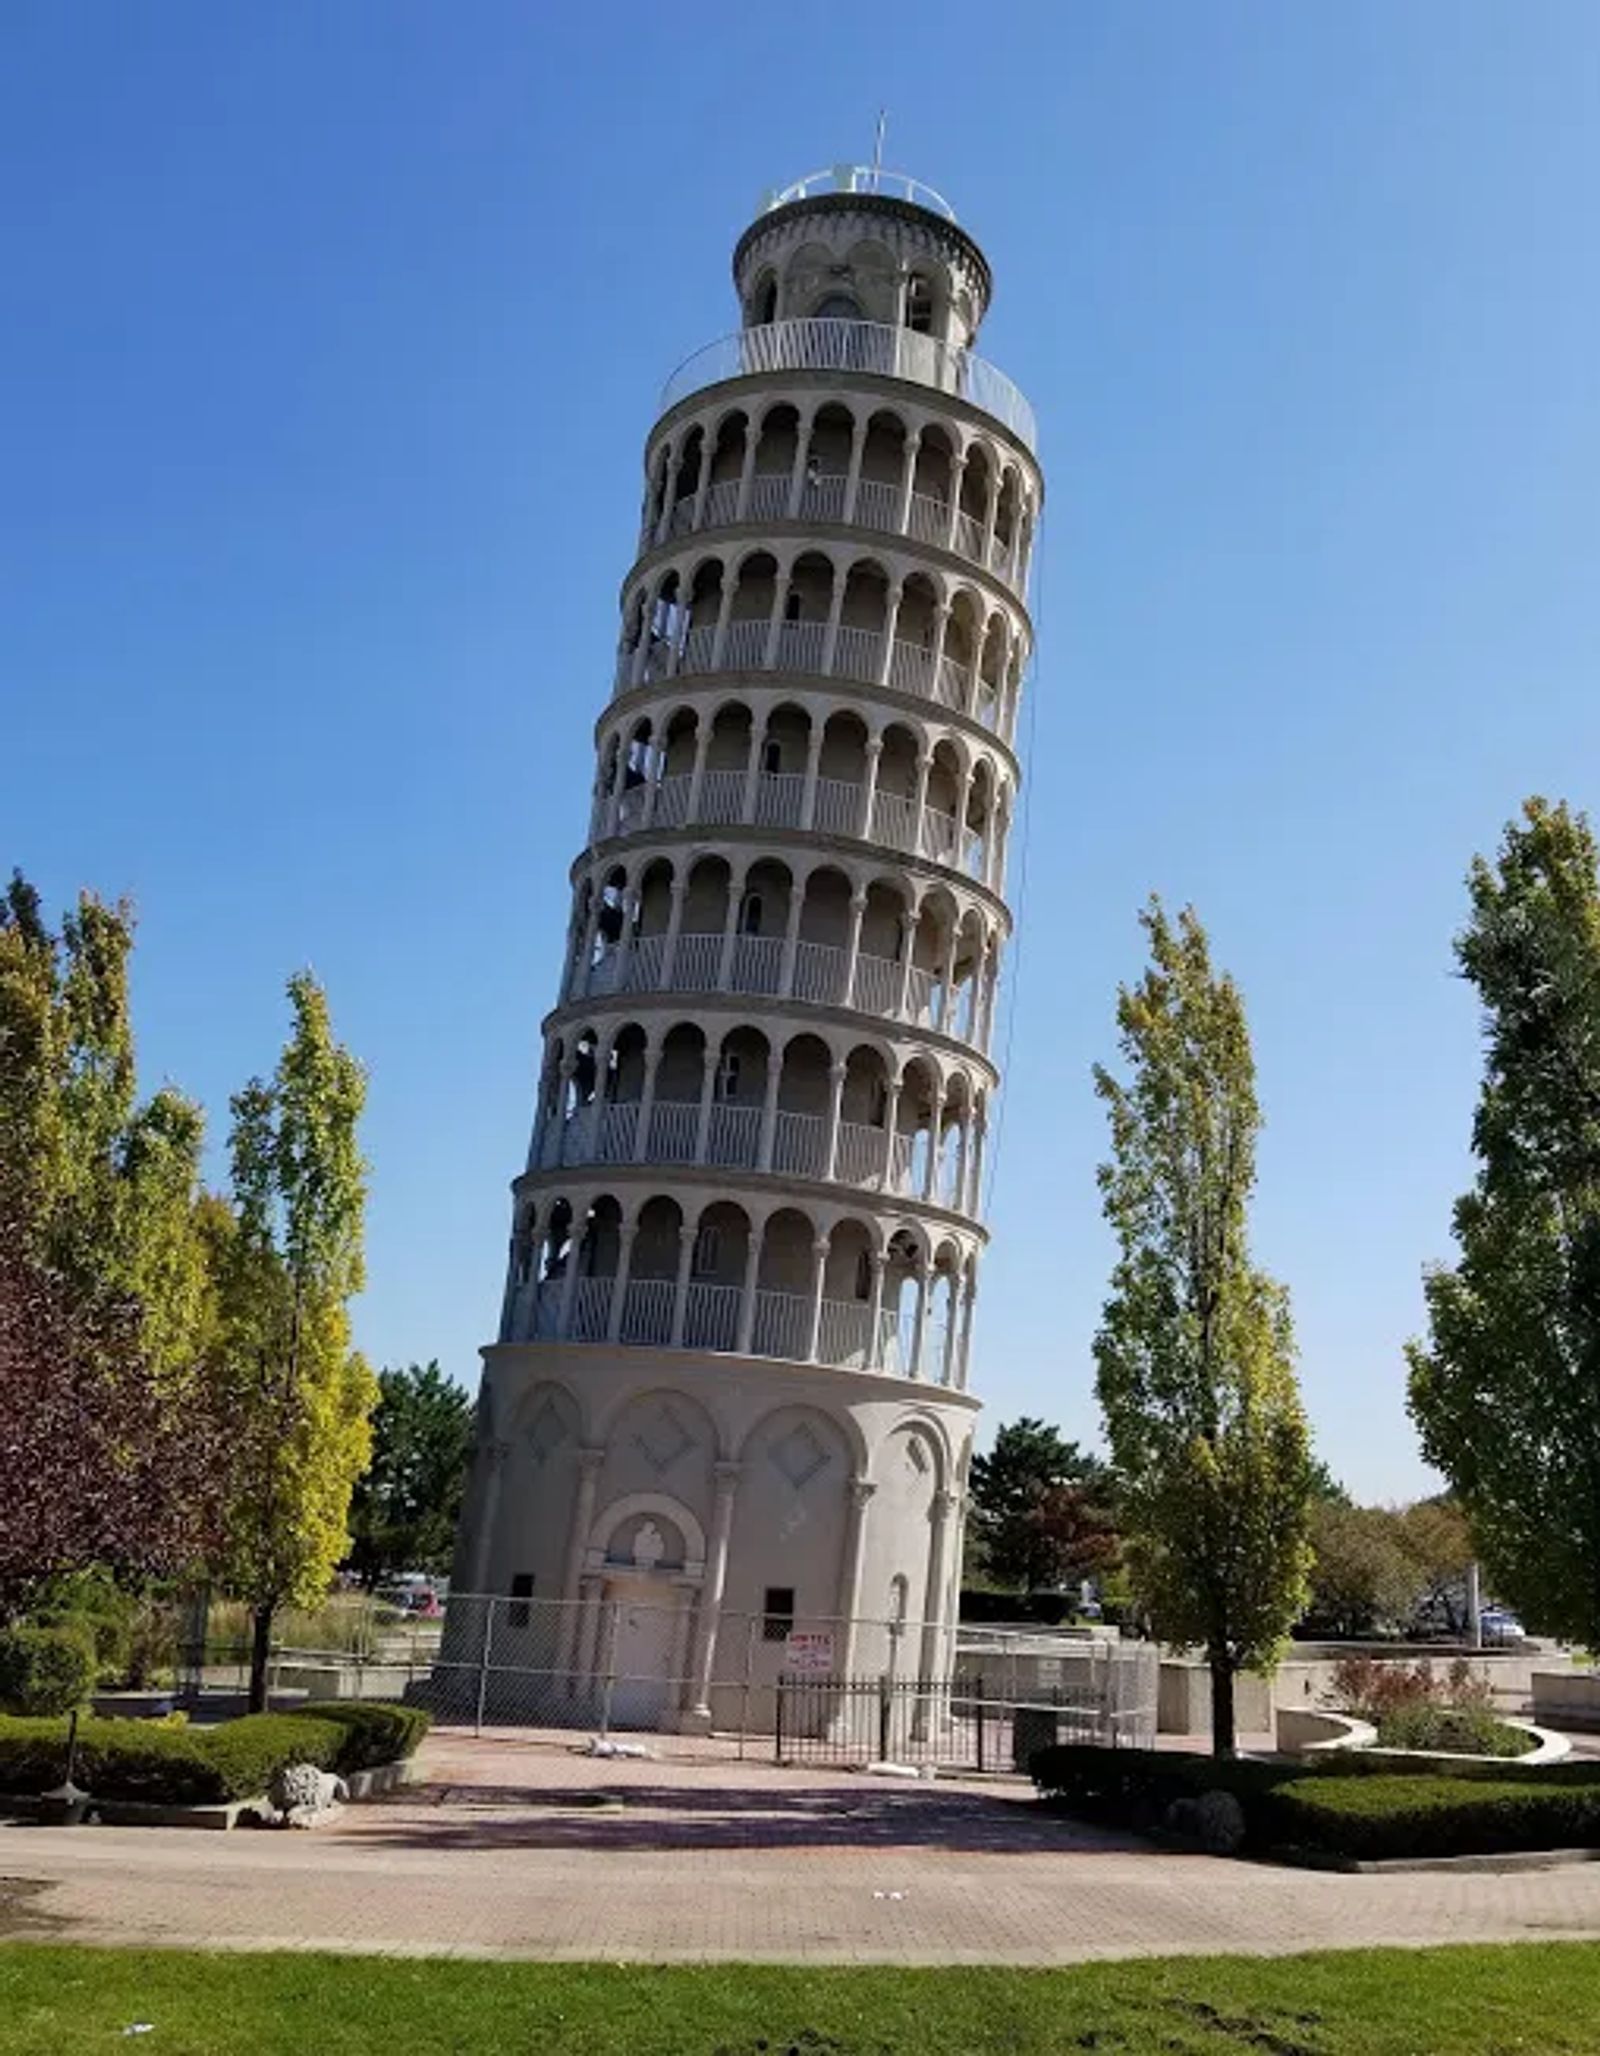 Photo of the Leaning Tower of Niles, in Niles, Illinois